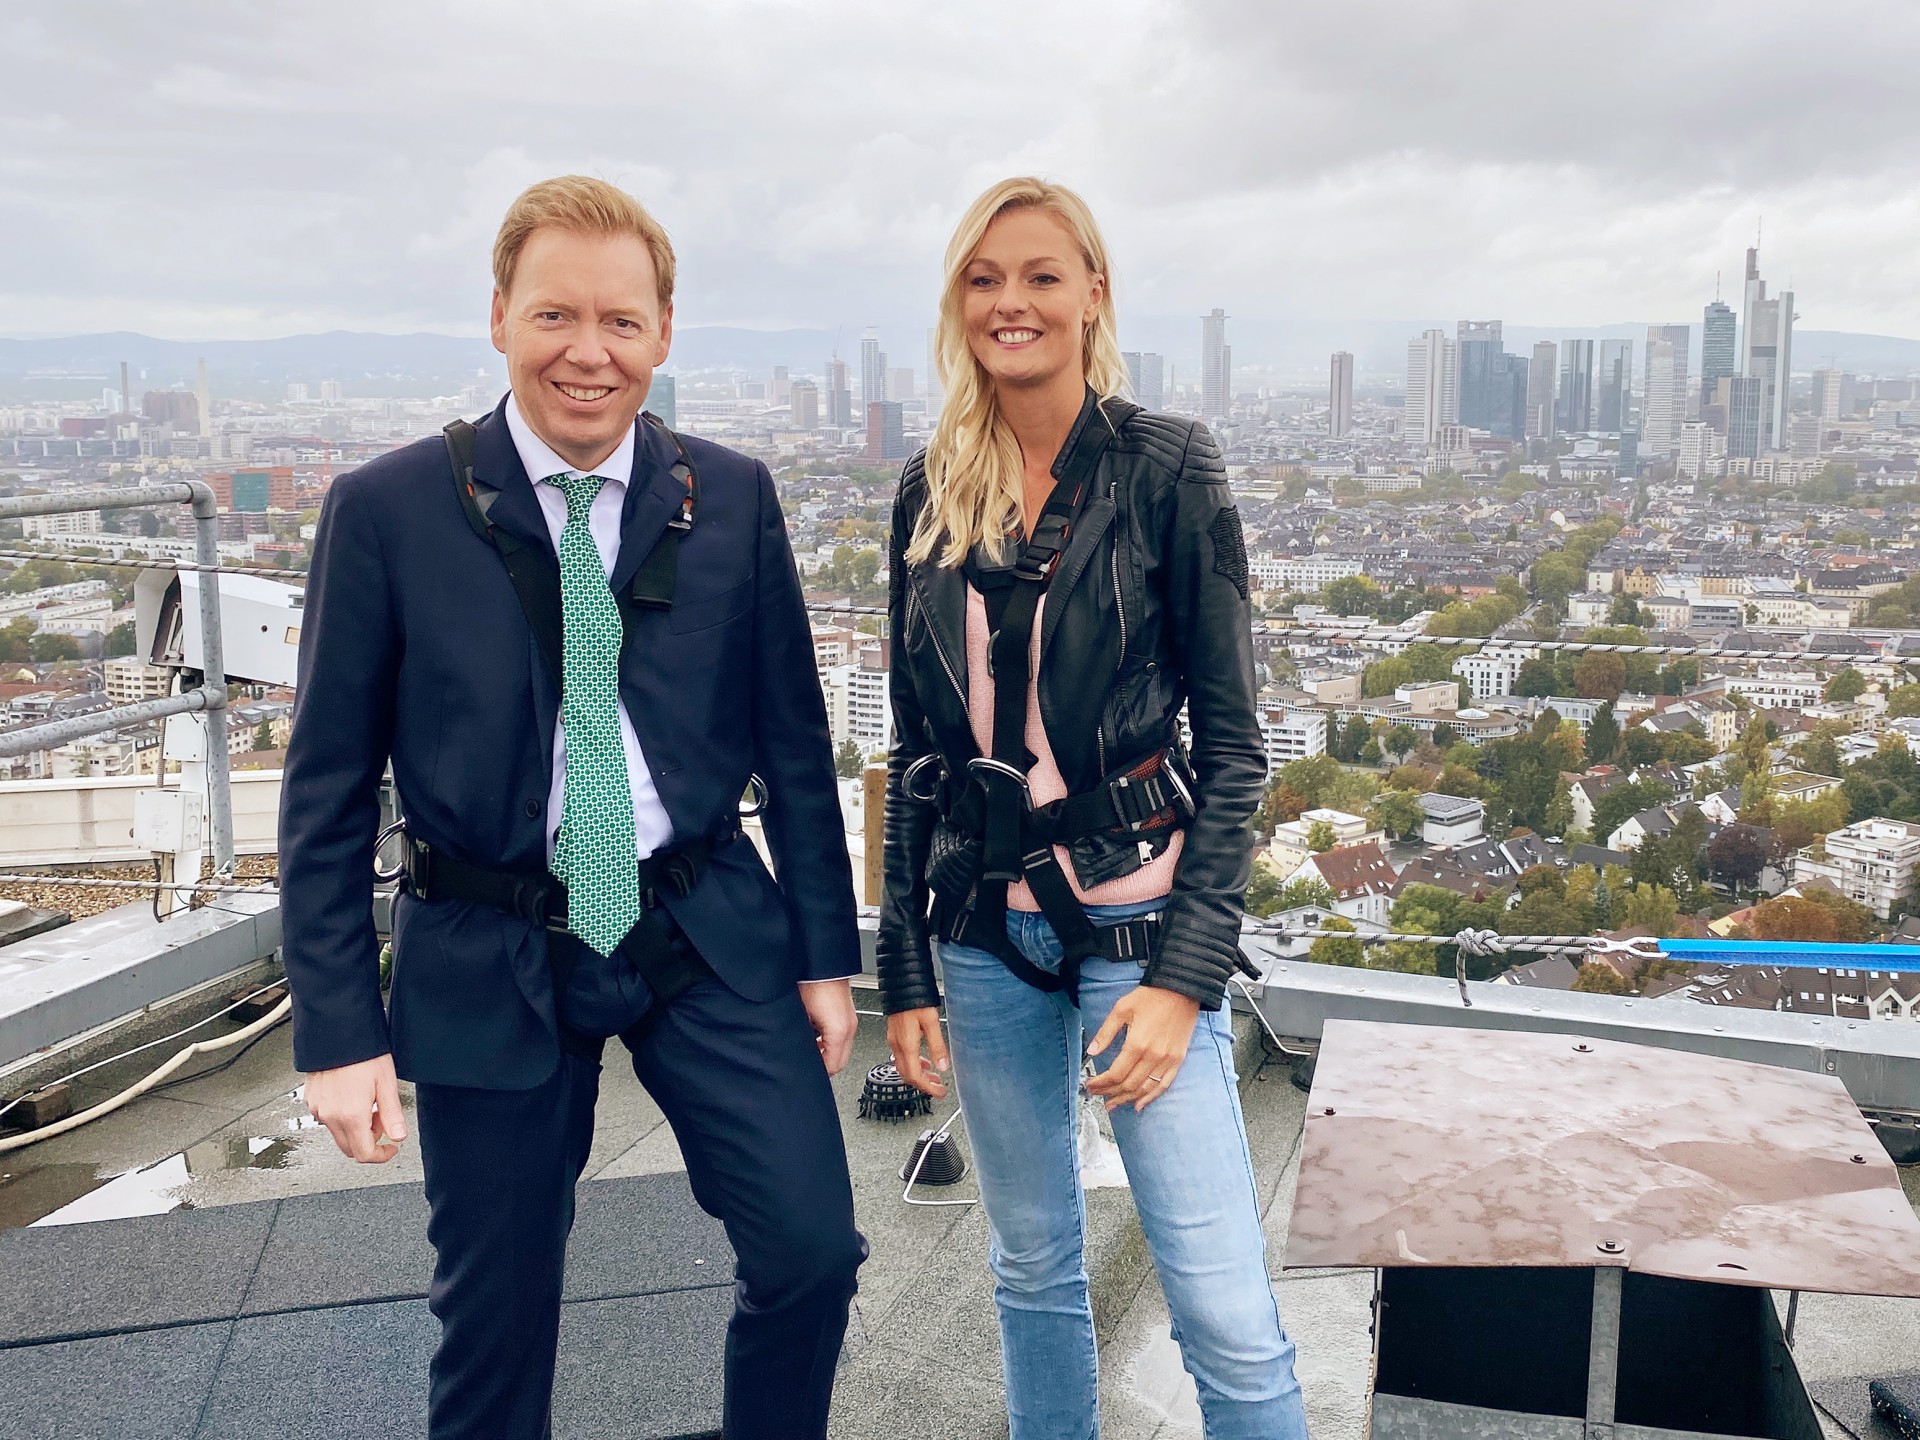 Man in suit and woman in casual clothes stand smiling on a skyscraper roof